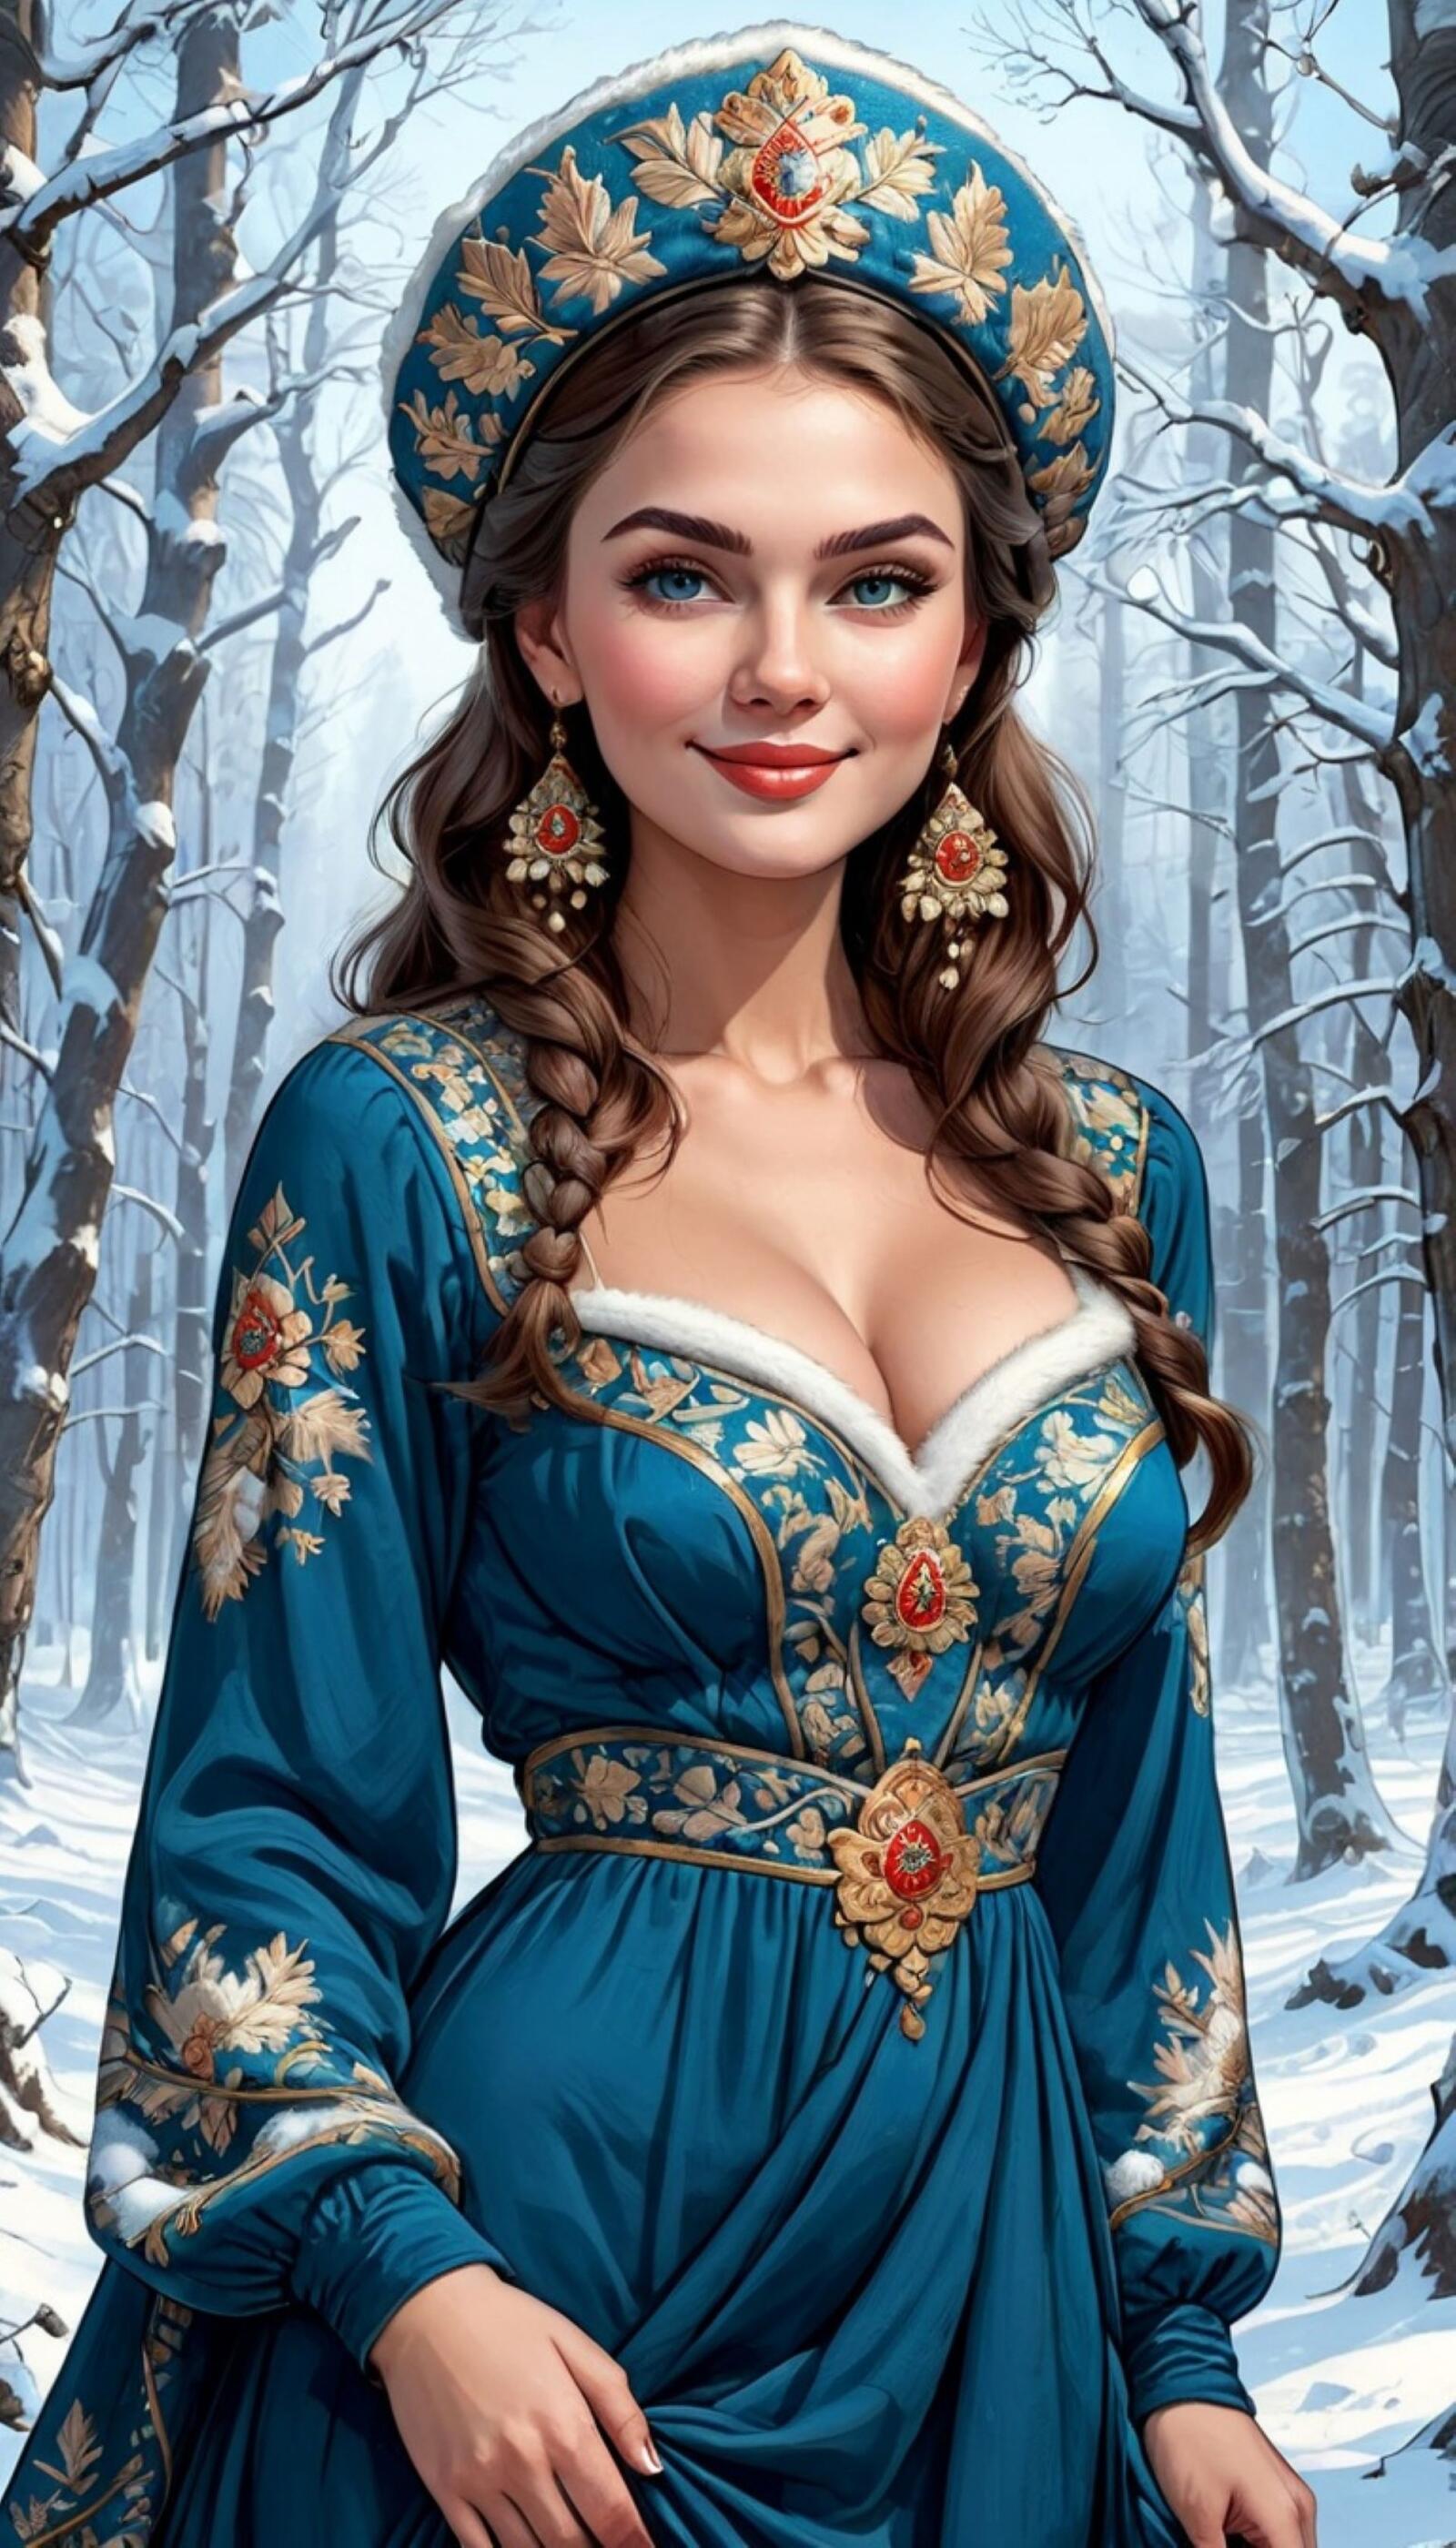 Free photo Russian beauty in the winter forest